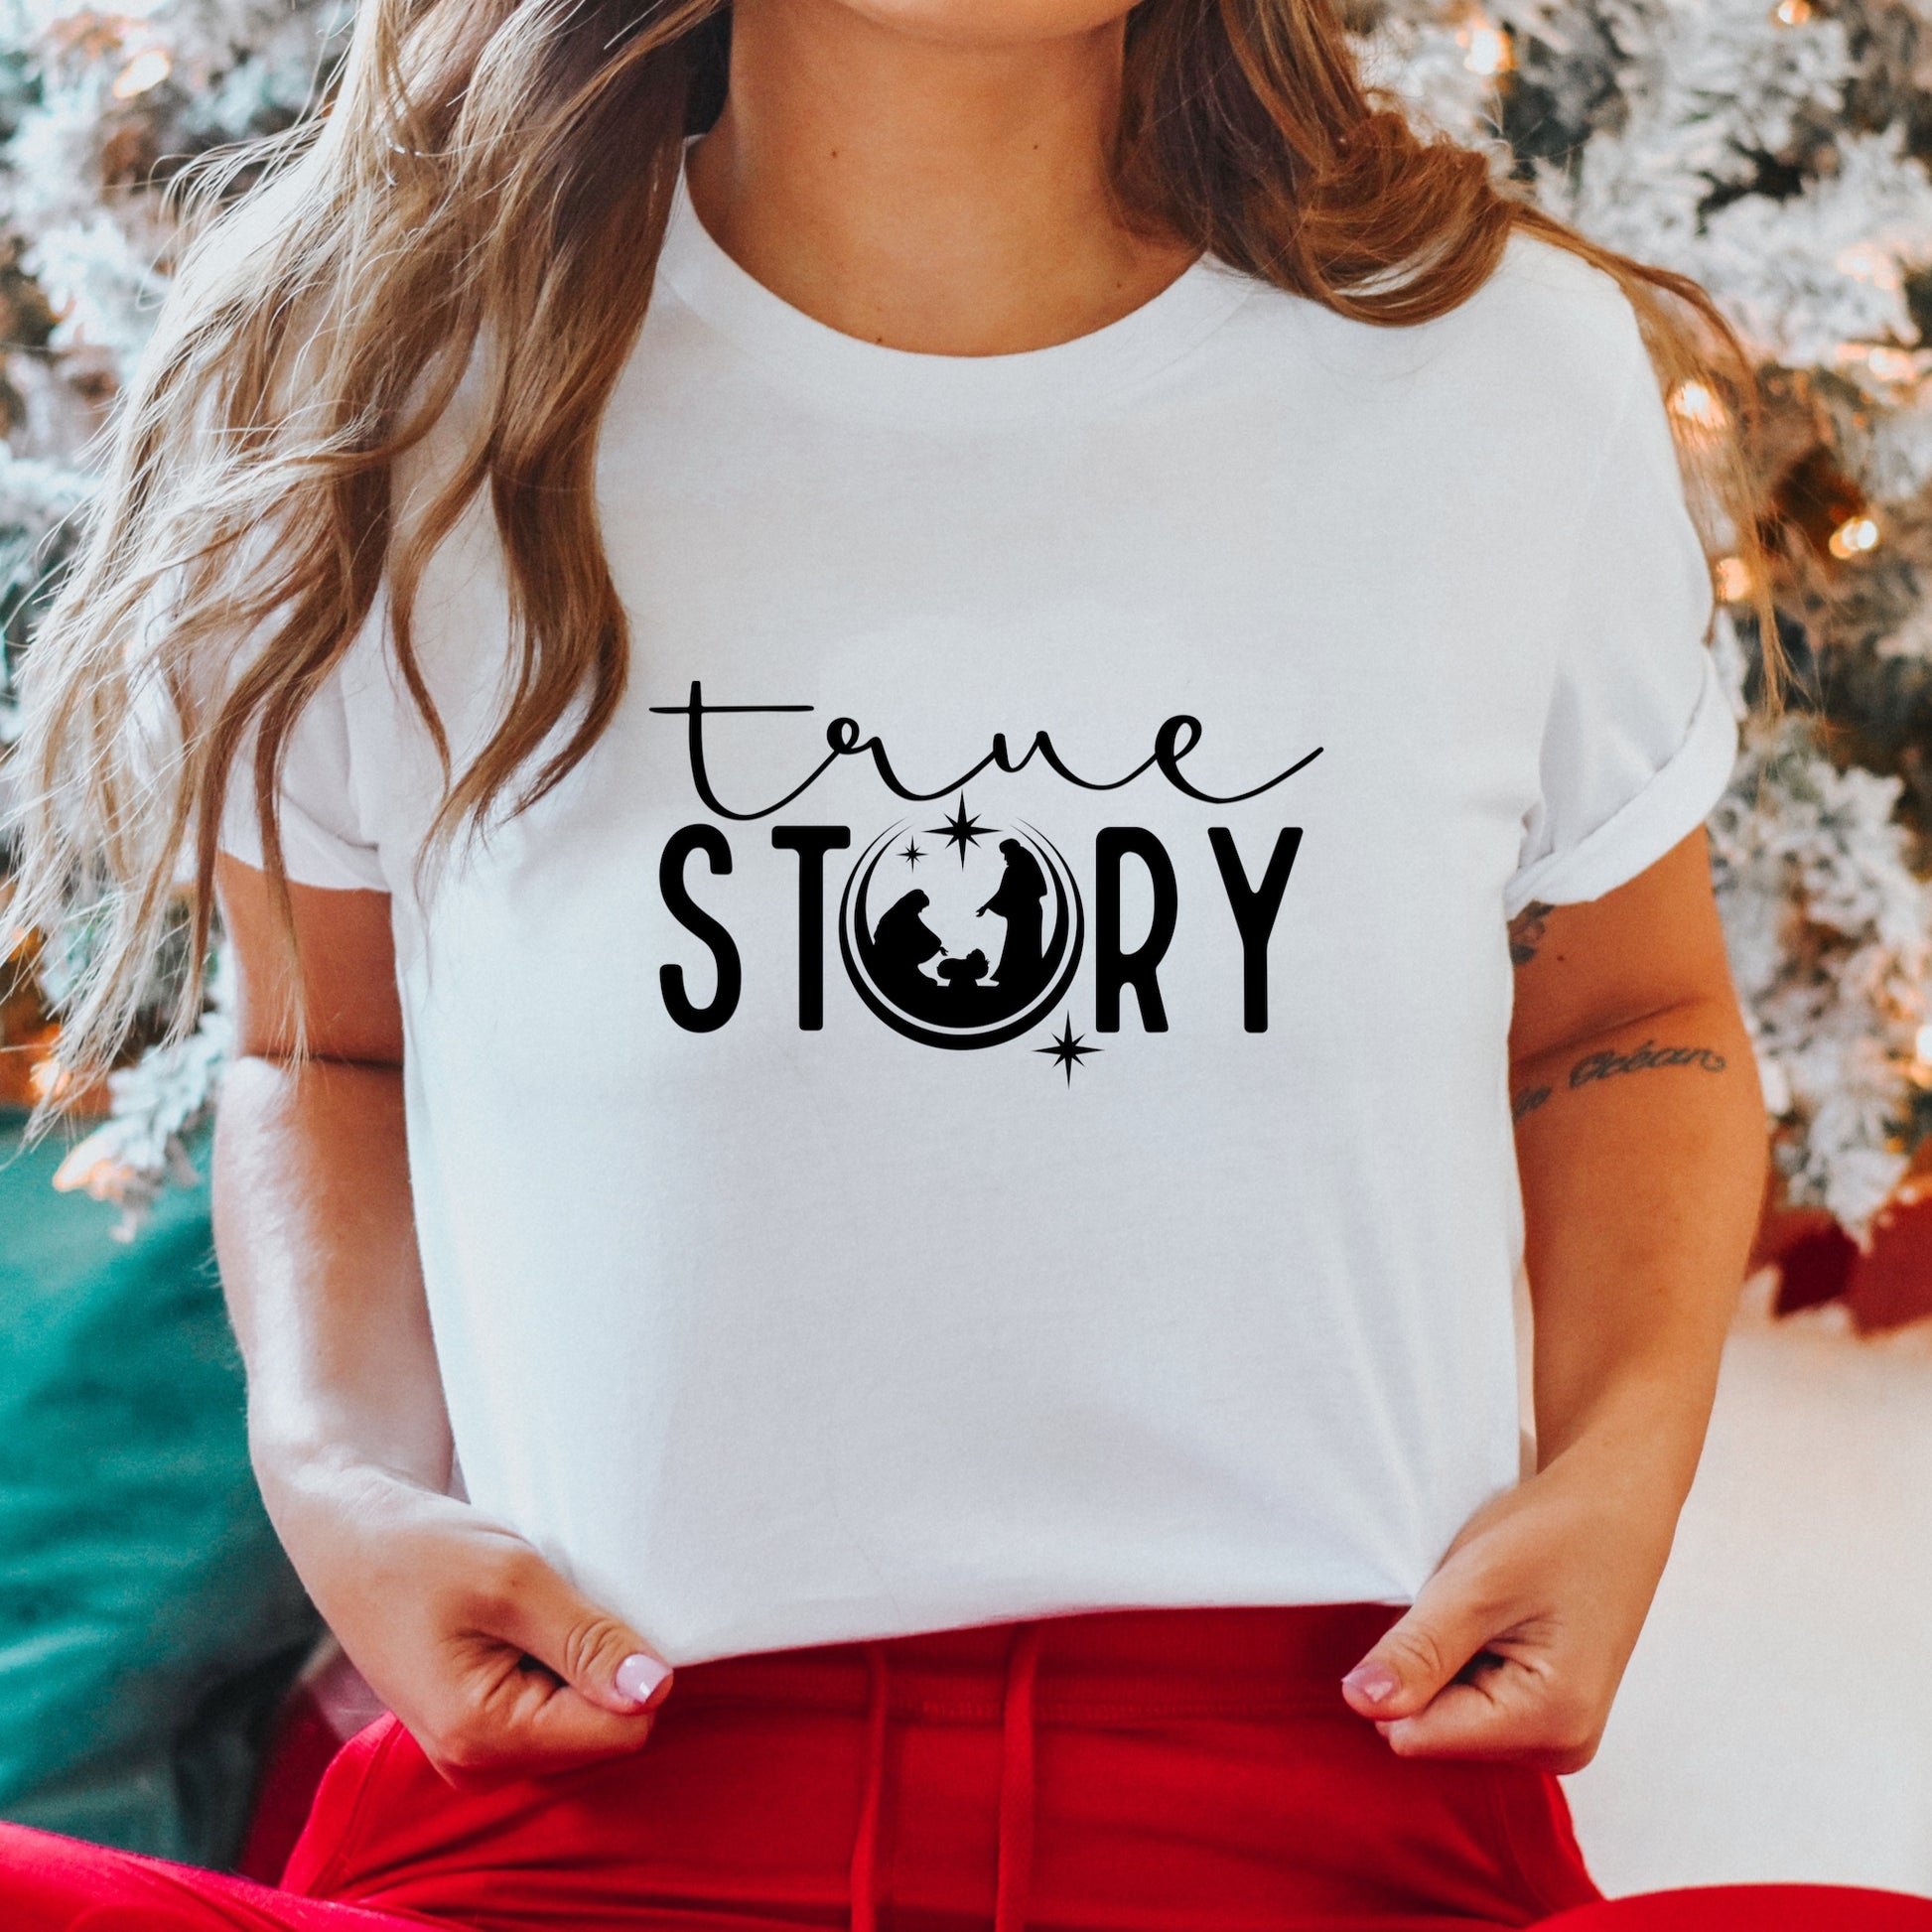 Nativity Scene Iron On with the phrase "True Story" on a white t-shirt - Christmas Sublimation Iron on Transfer - DTF Iron on